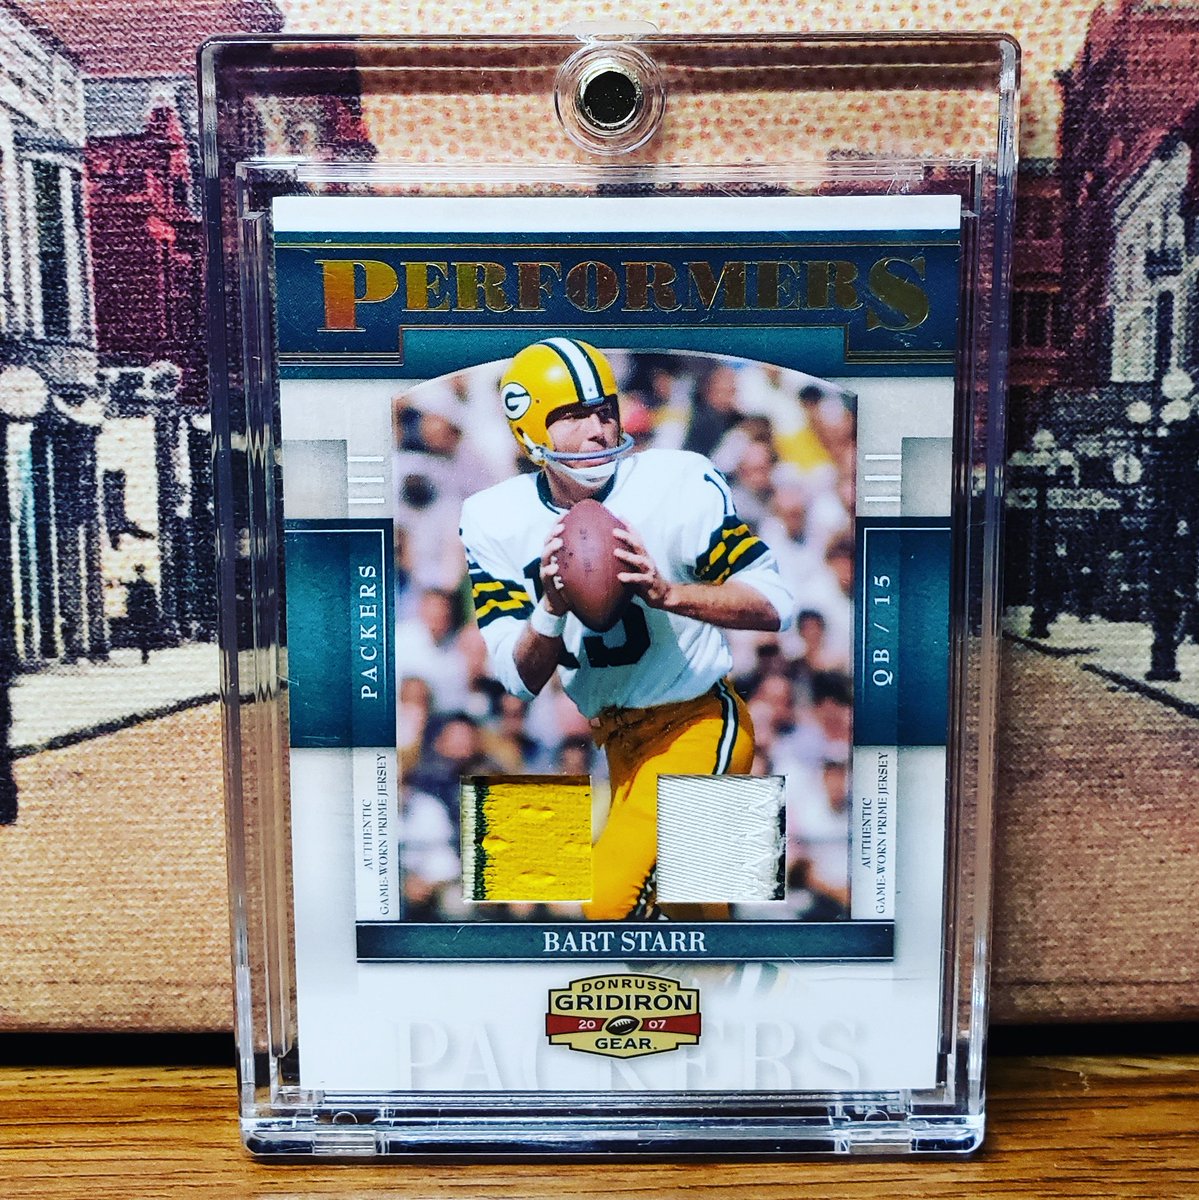 From the patch PC - 2007 Gridiron Gear Bart Starr Dual Prime Gane Used Patch. There was so much goodness from this time period! #bartstarr #greenbaypackers #gameworn #gameusedjersey #gridirongear #thehobby #footballcards